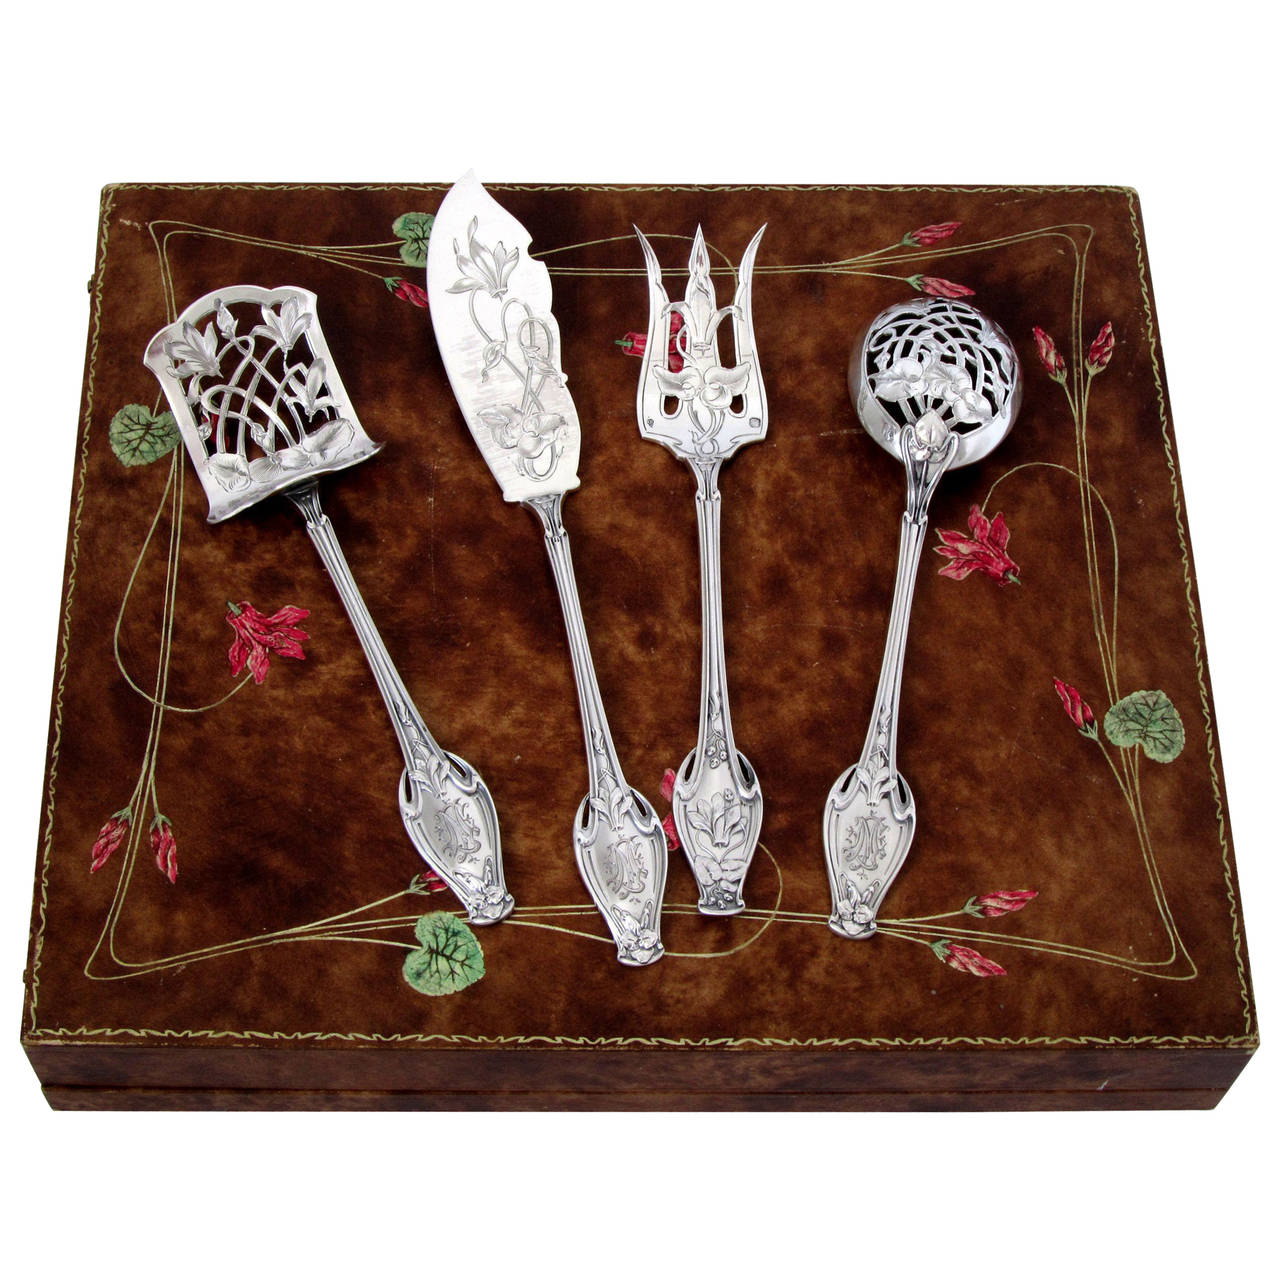 Soufflot Masterpiece French All Sterling Silver Dessert Set 4 pc chest Cyclamen For Sale